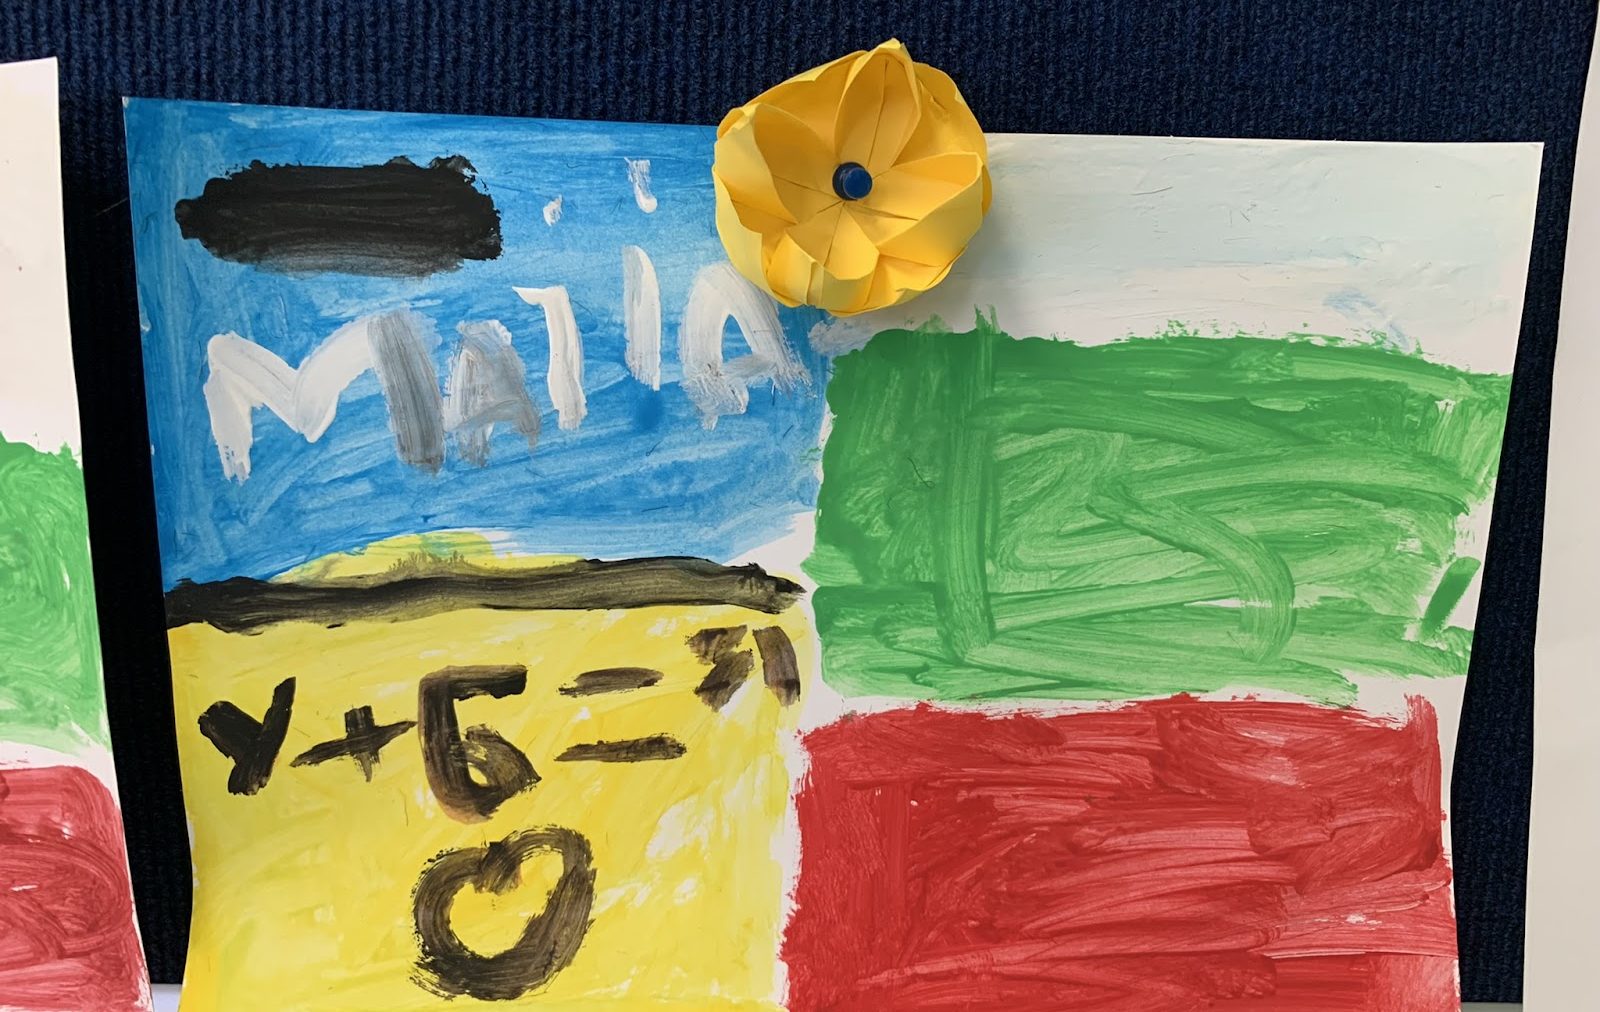 The Ukrainian and Bulgarian flags where a girl, Maia, wrote Y (Ukraine) + Б (for Bulgaria) equals love.